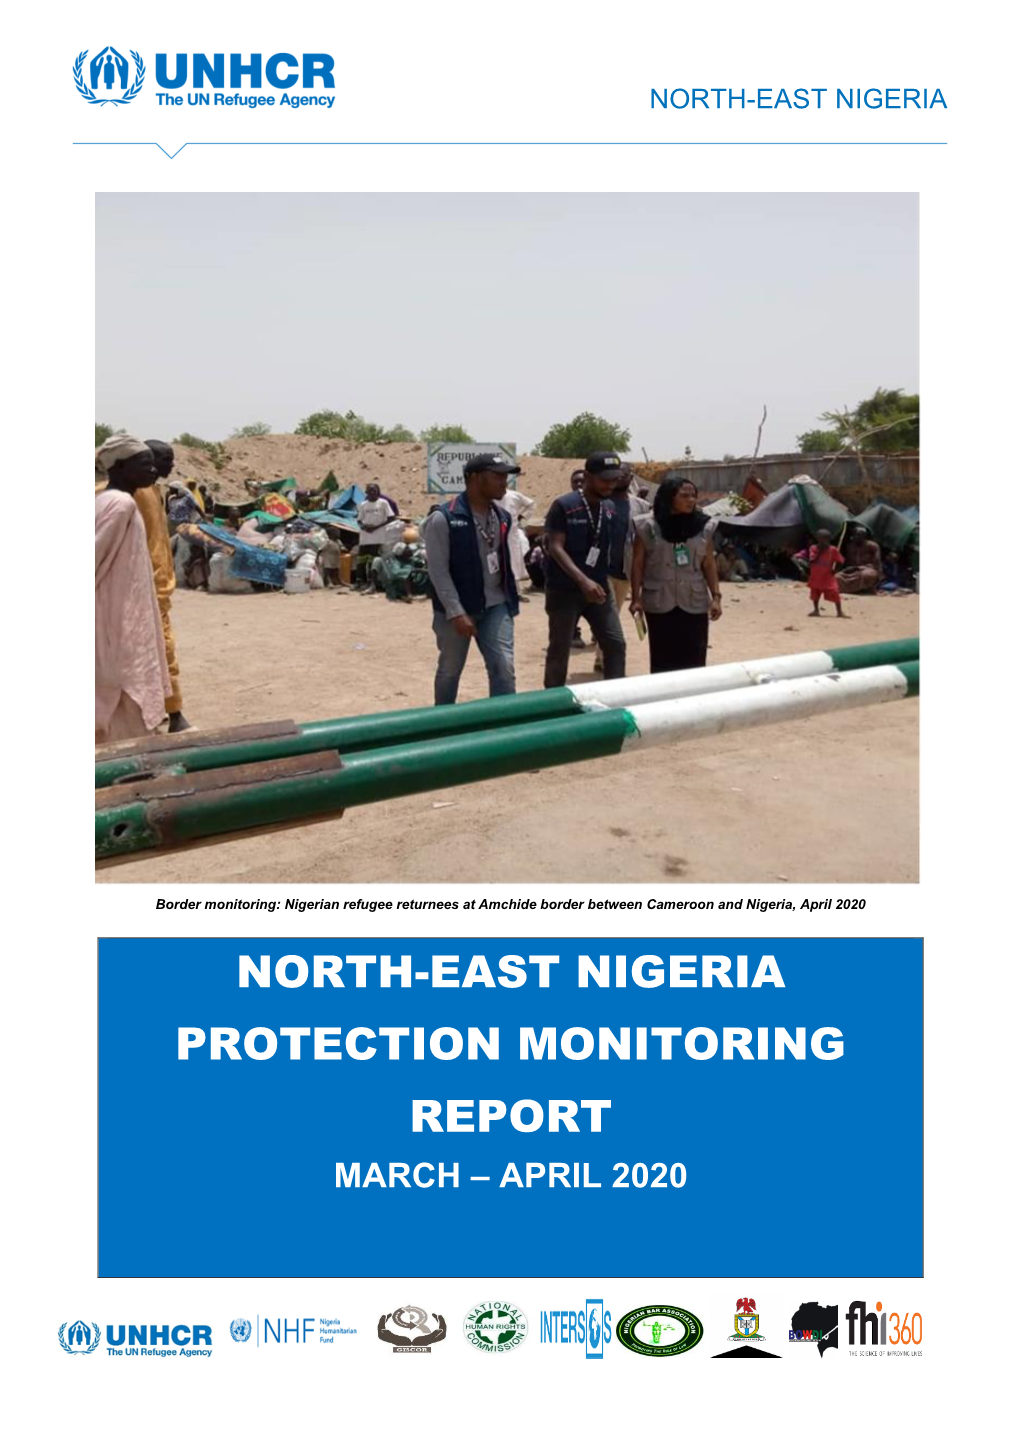 North-East Nigeria Protection Monitoring Report March – April 2020